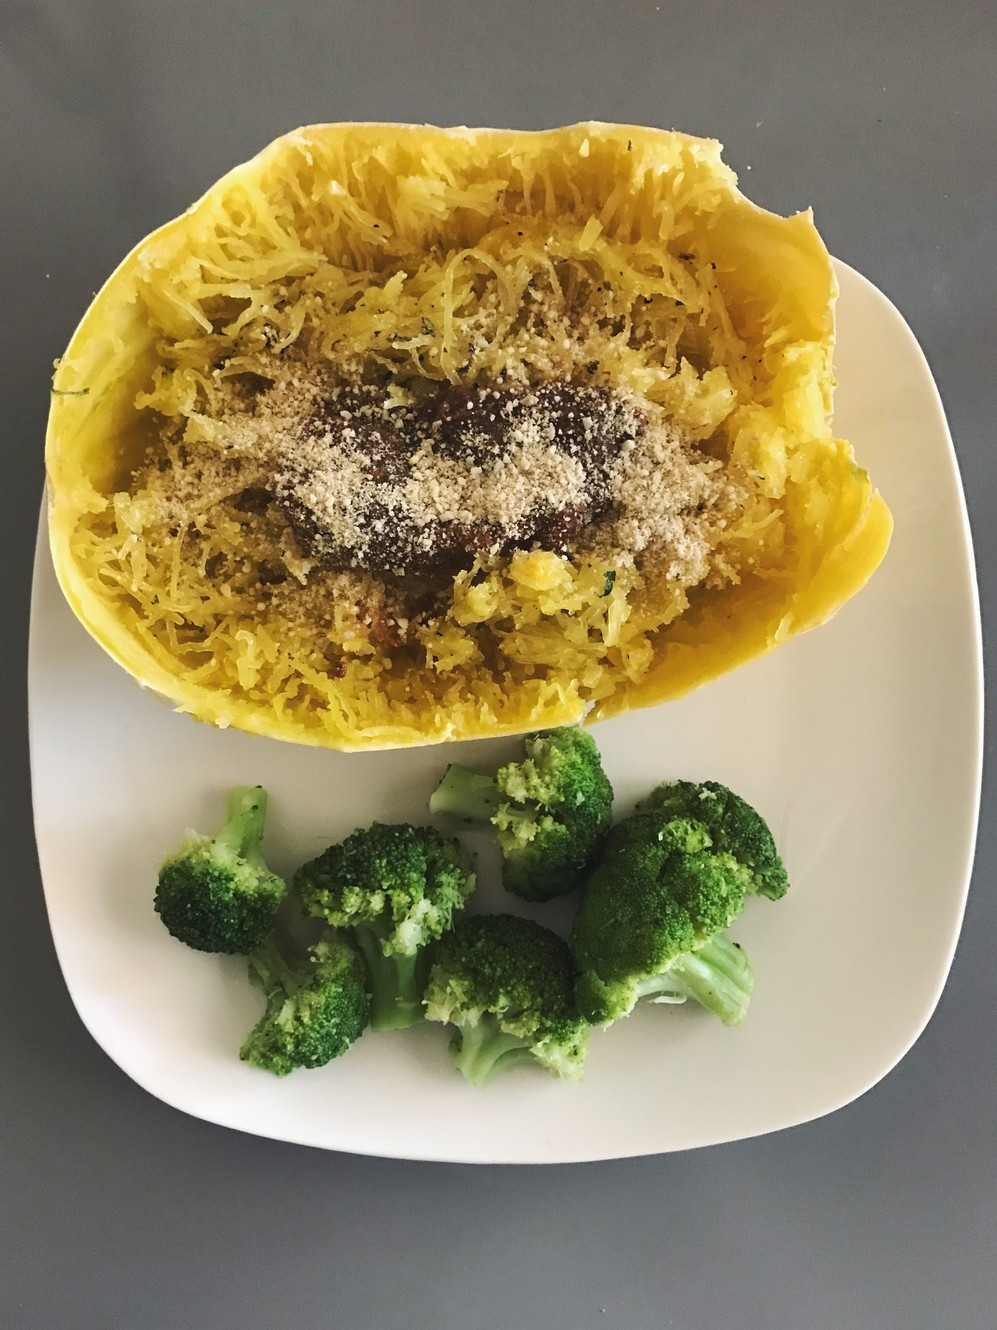 Cooking Spaghetti Squash In The Microwave
 How to Cook Spaghetti Squash in the Microwave